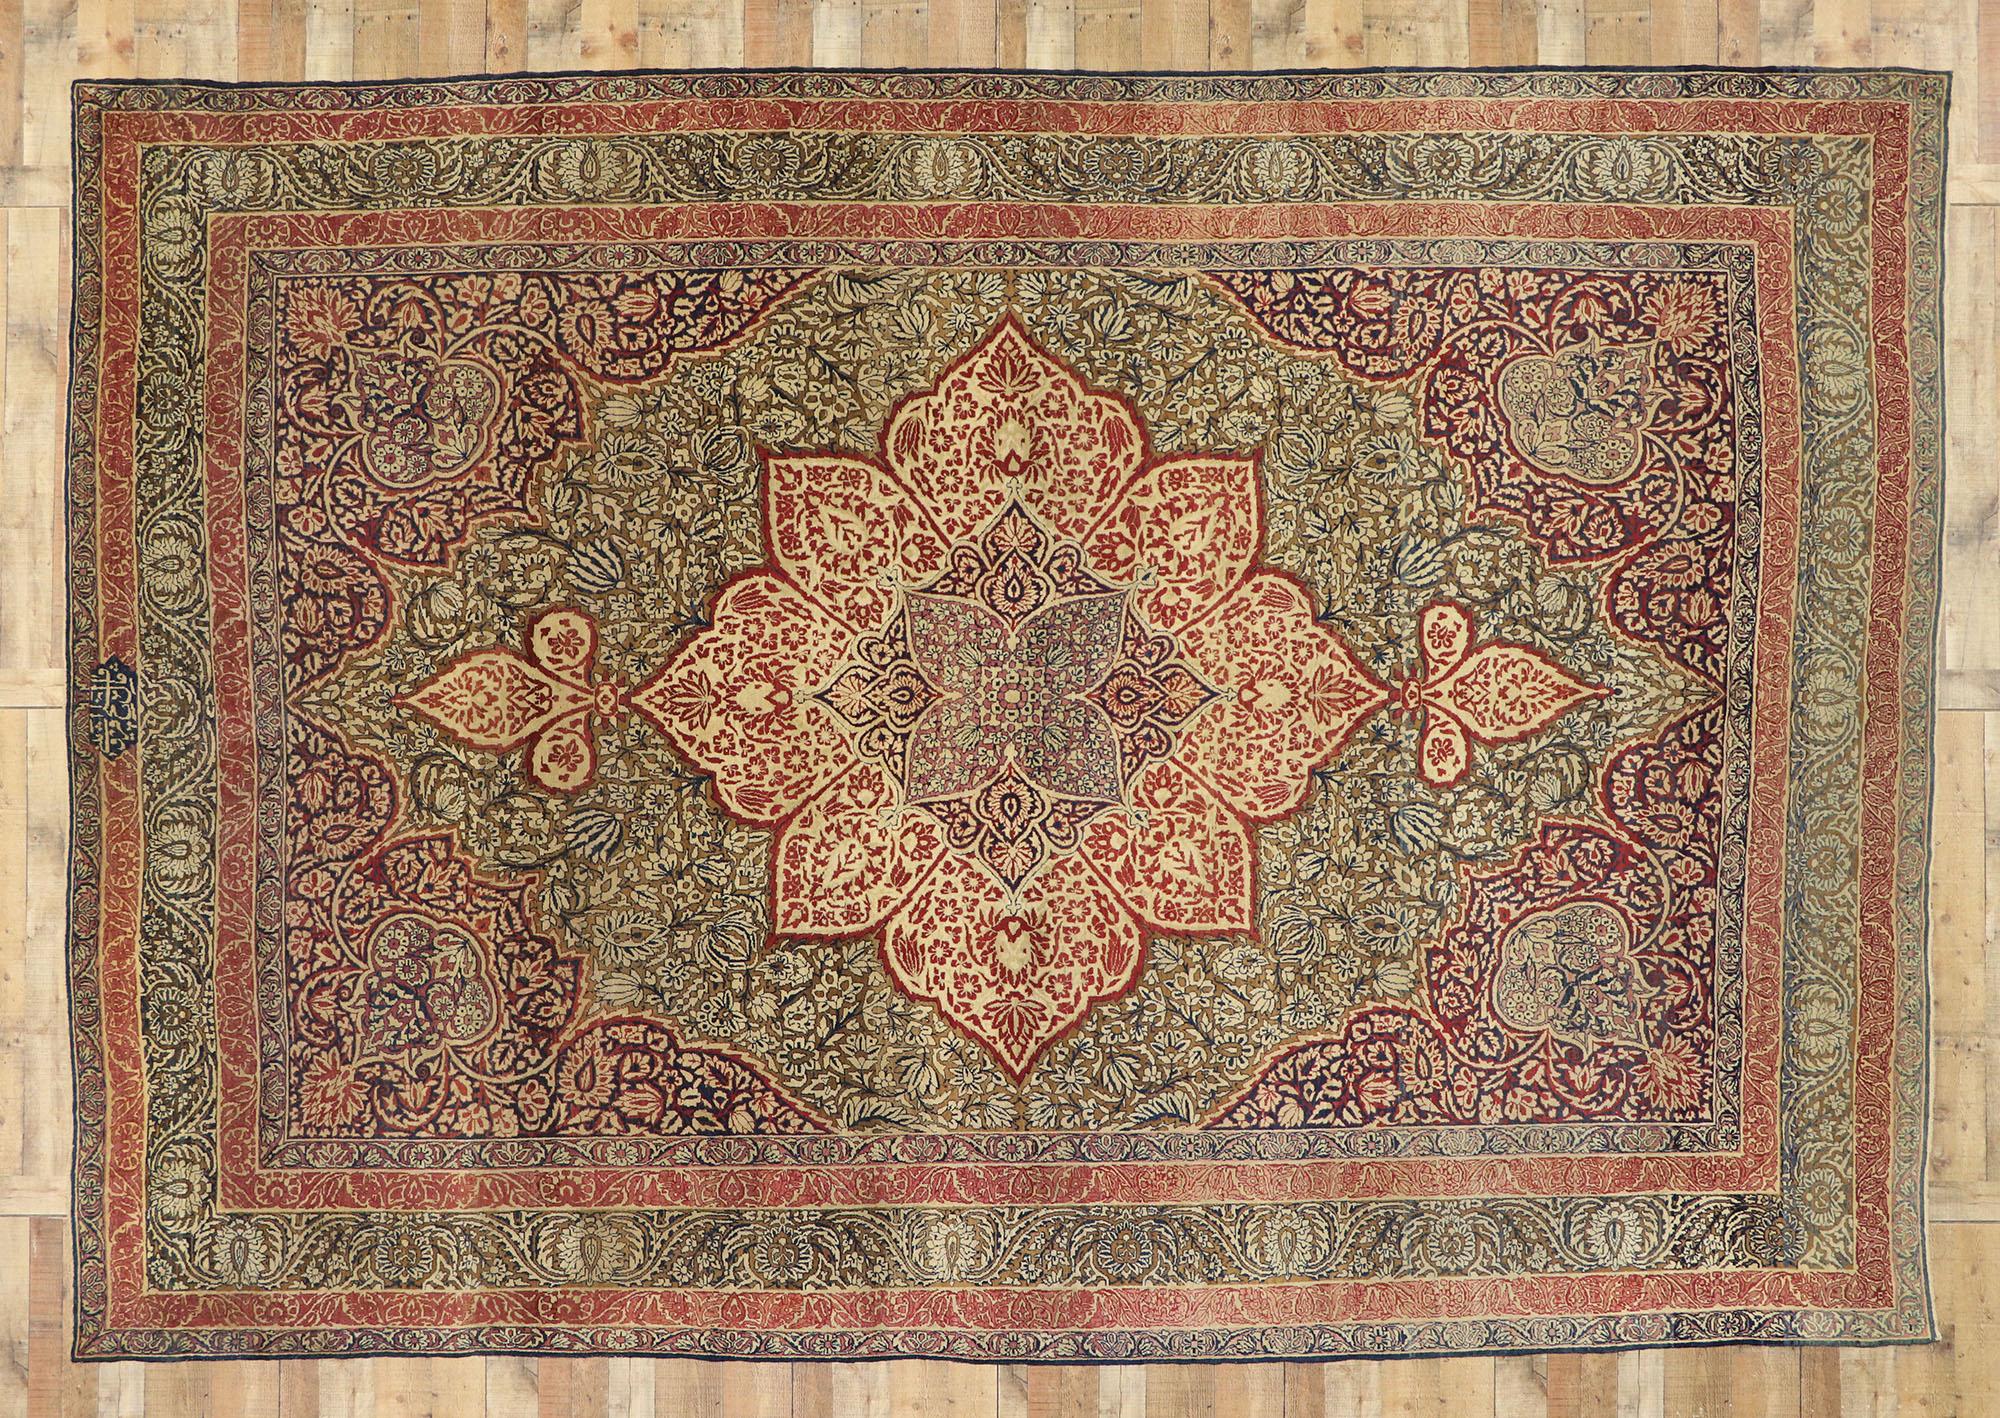 Wool Antique Persian Kermanshah Rug with William Morris Arts & Crafts Style For Sale